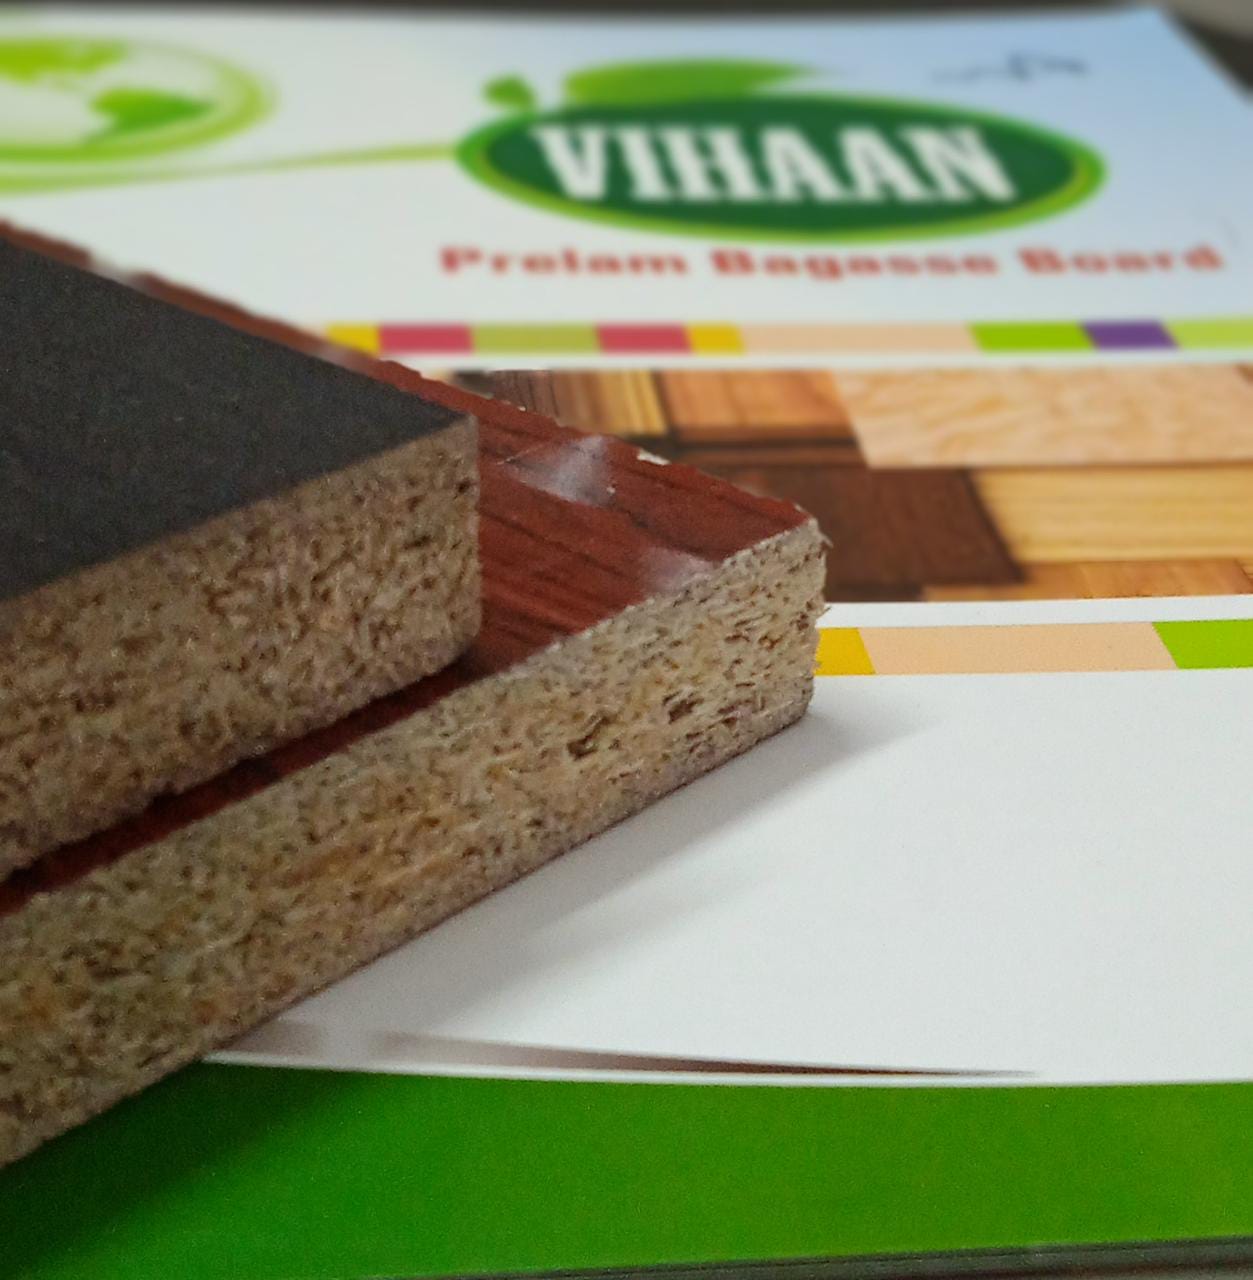 Find the Particle Board Manufacturers india at Vihaan Partical BoardServicesEverything ElseEast DelhiShahdara